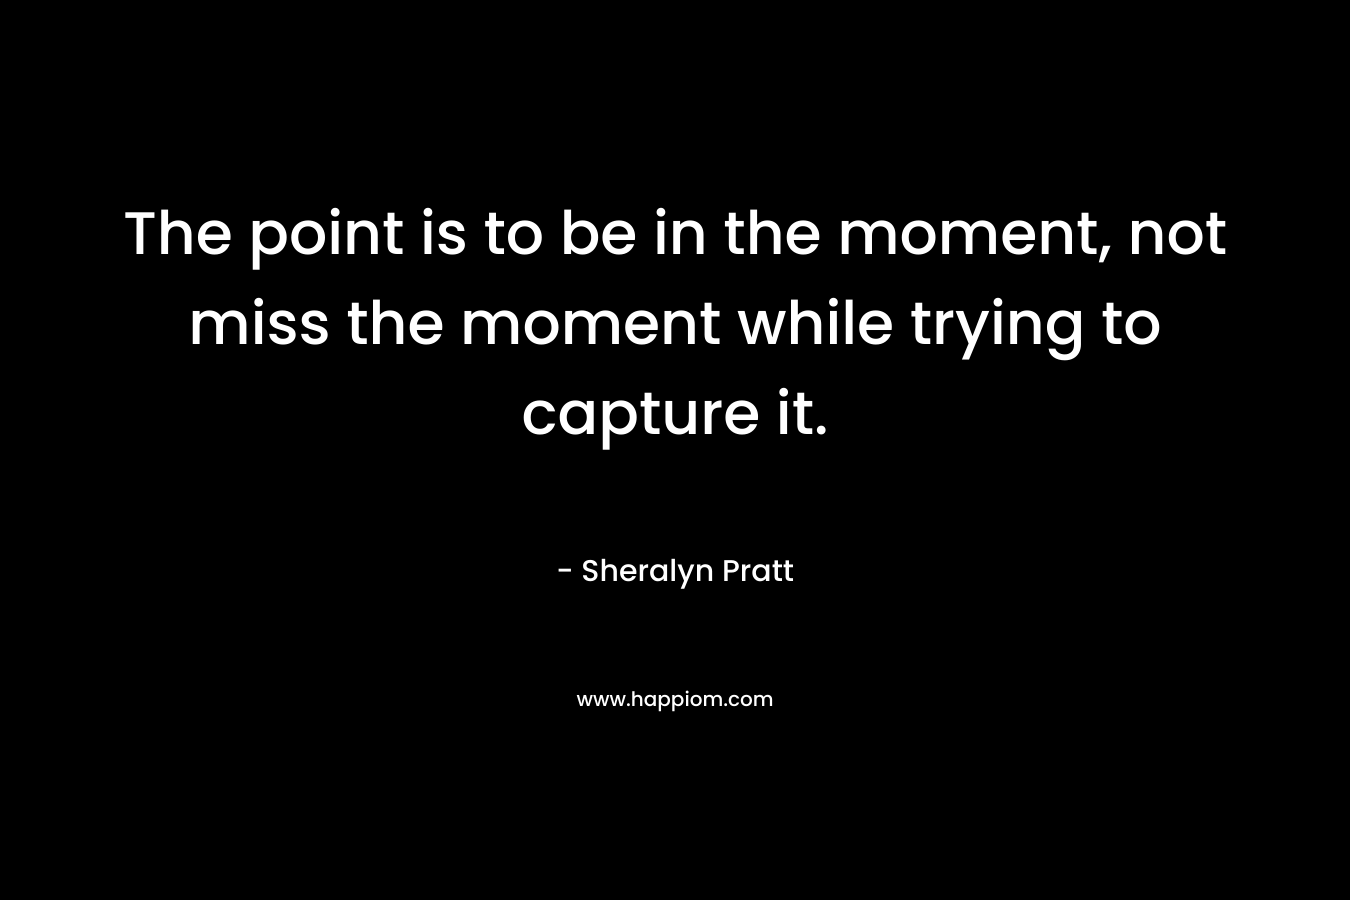 The point is to be in the moment, not miss the moment while trying to capture it. – Sheralyn Pratt